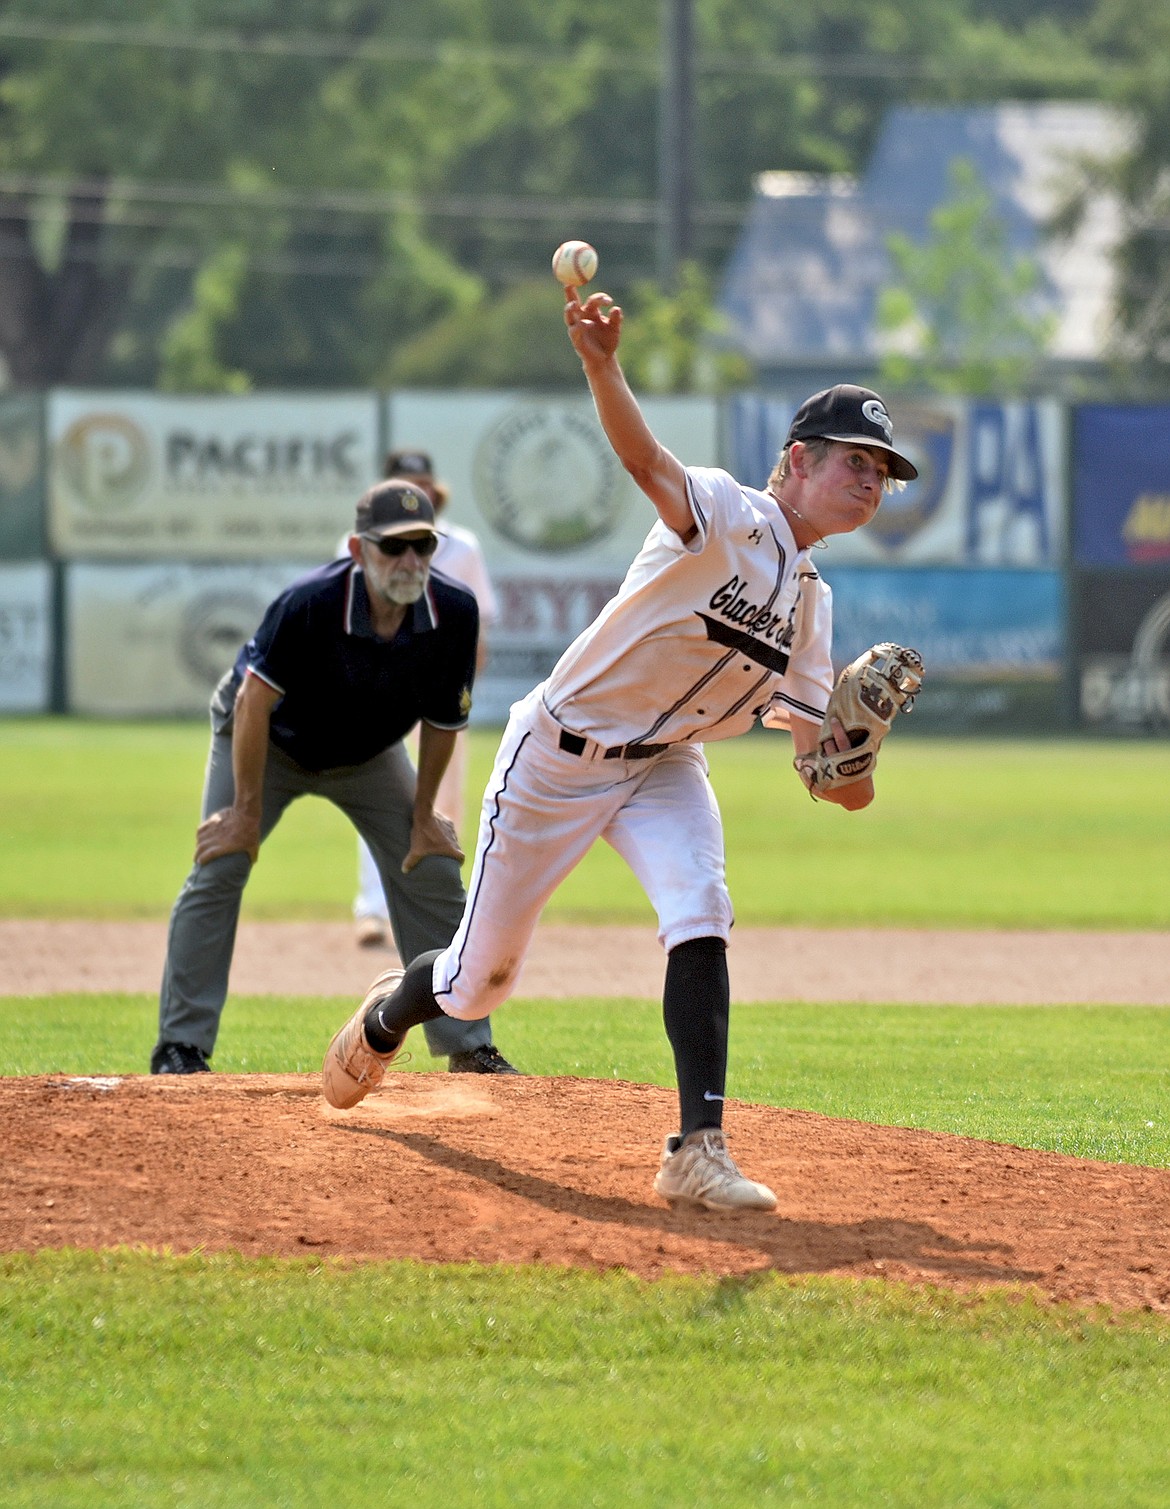 Twins pitcher Hayden Meehan delivers a pitch after entering the game in the fifth inning against Missoula on Wednesday, July 14 in Whitefish. (Whitney England/Whitefish Pilot)